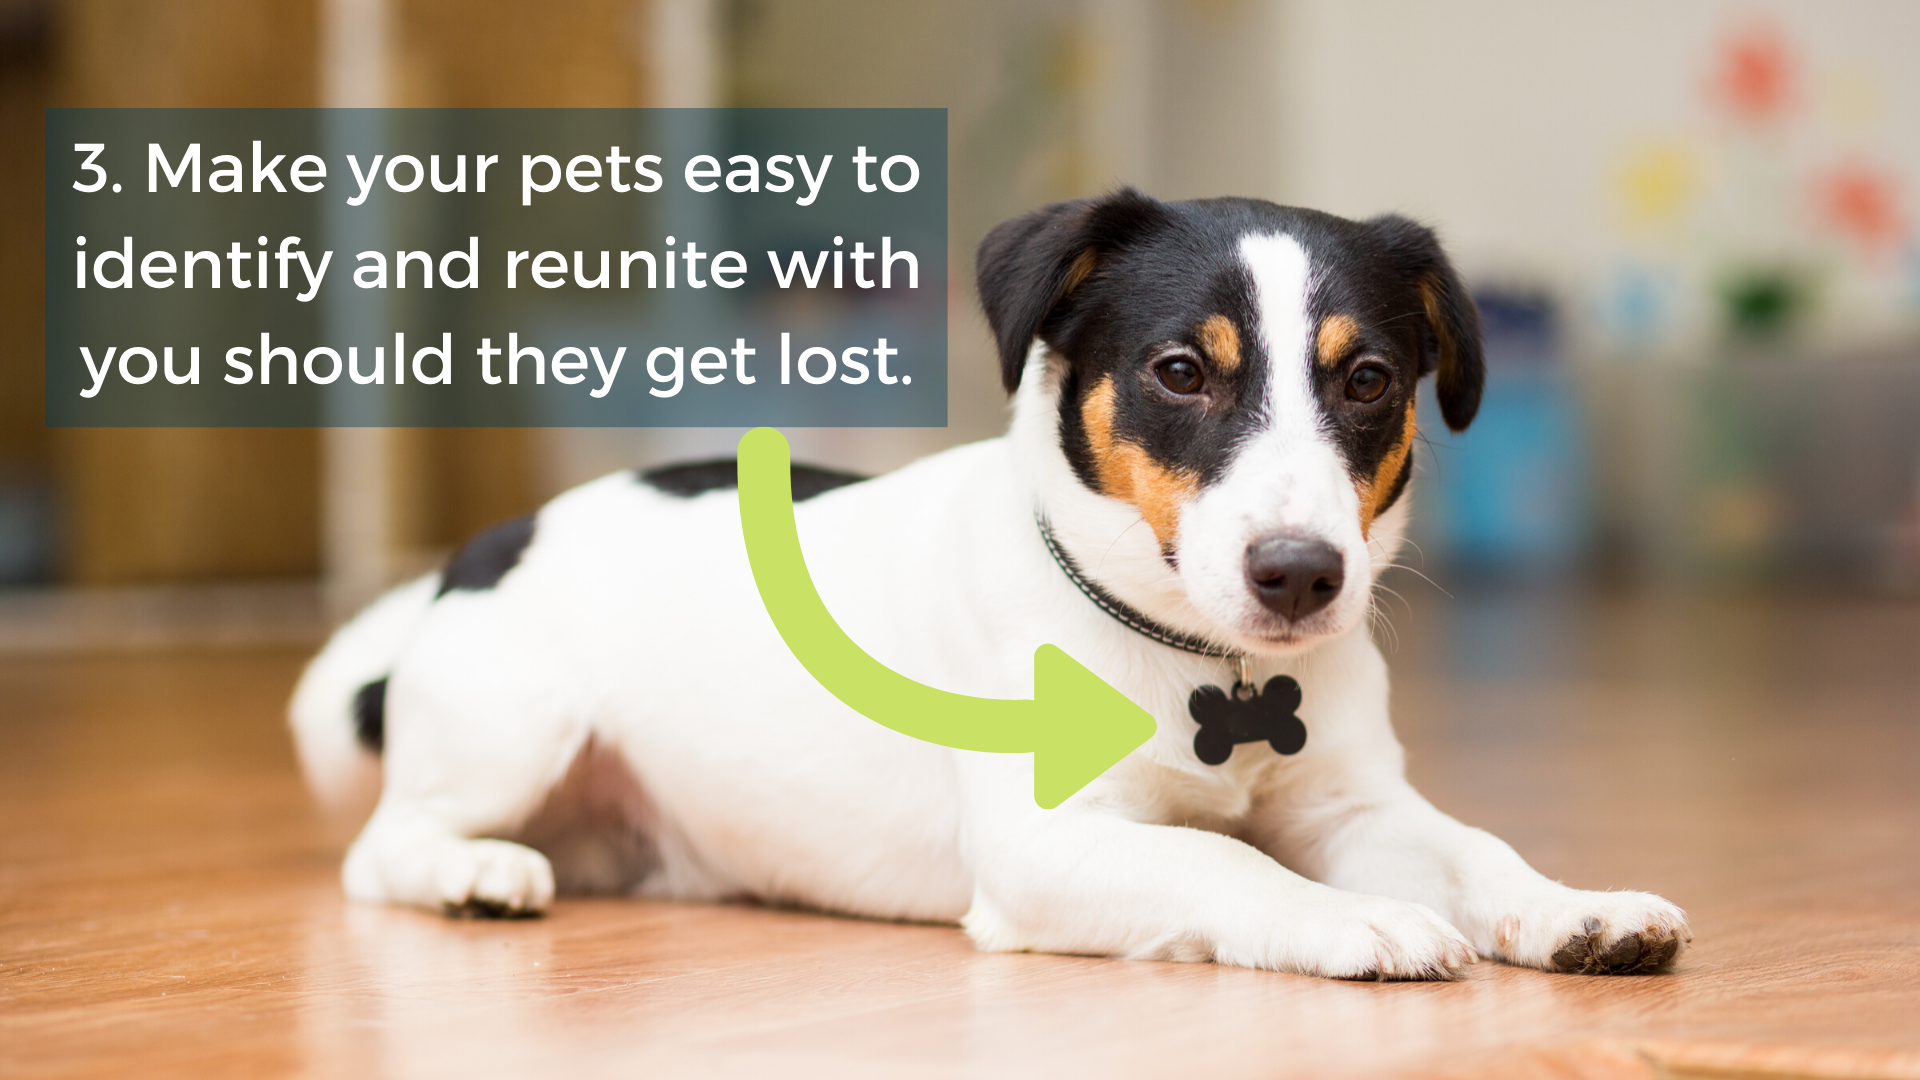 Make your pet easy to identify and reunite with you.